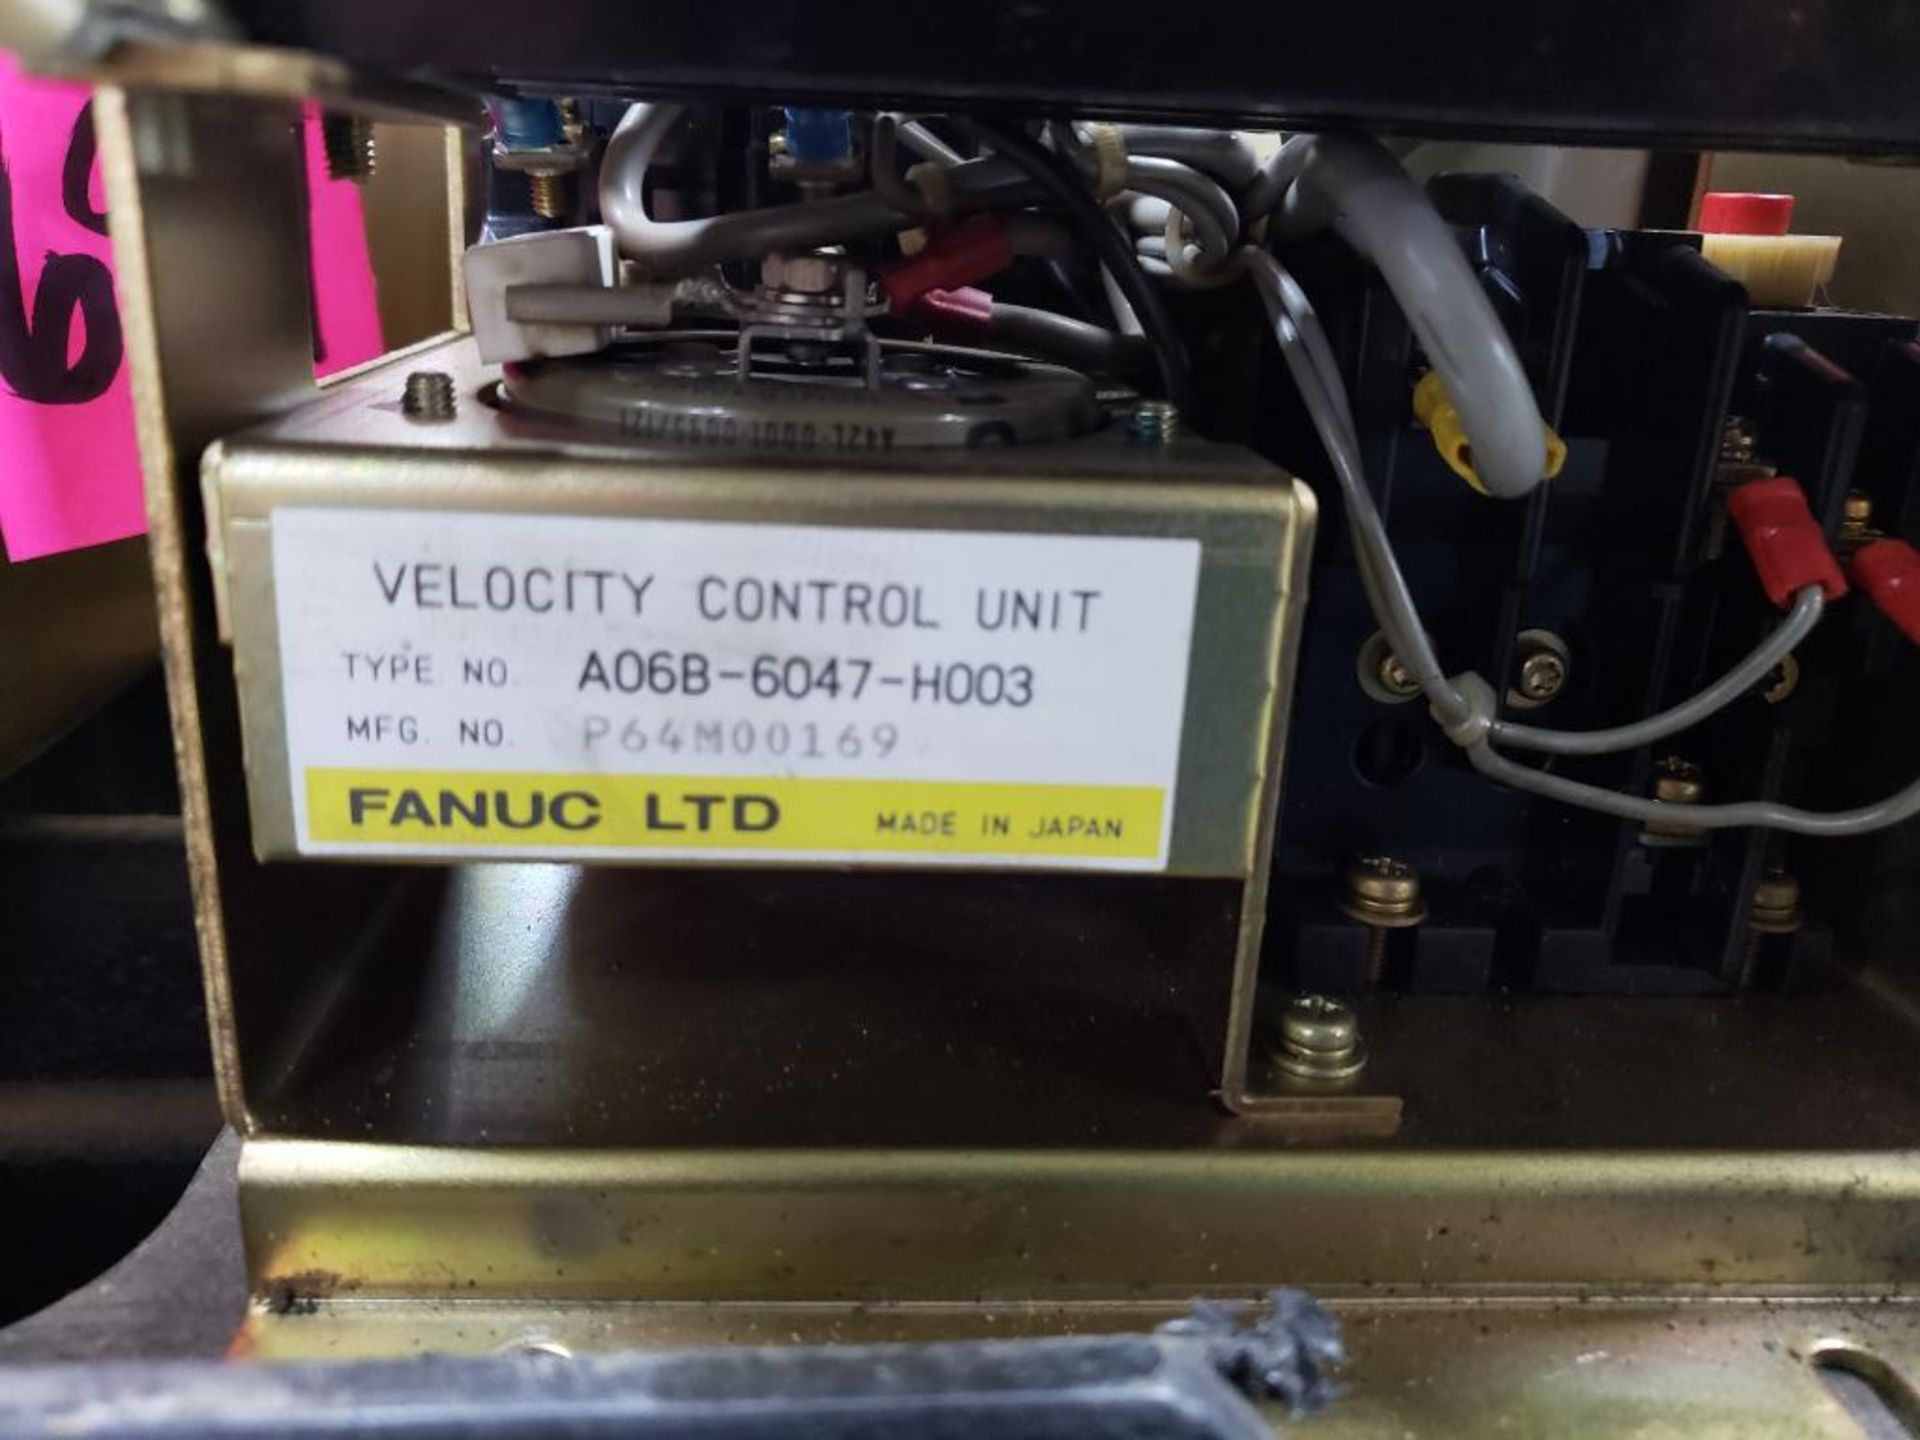 Fanuc velocity control unit model A06B-6047-H003. Pulled from working machine. - Image 3 of 5